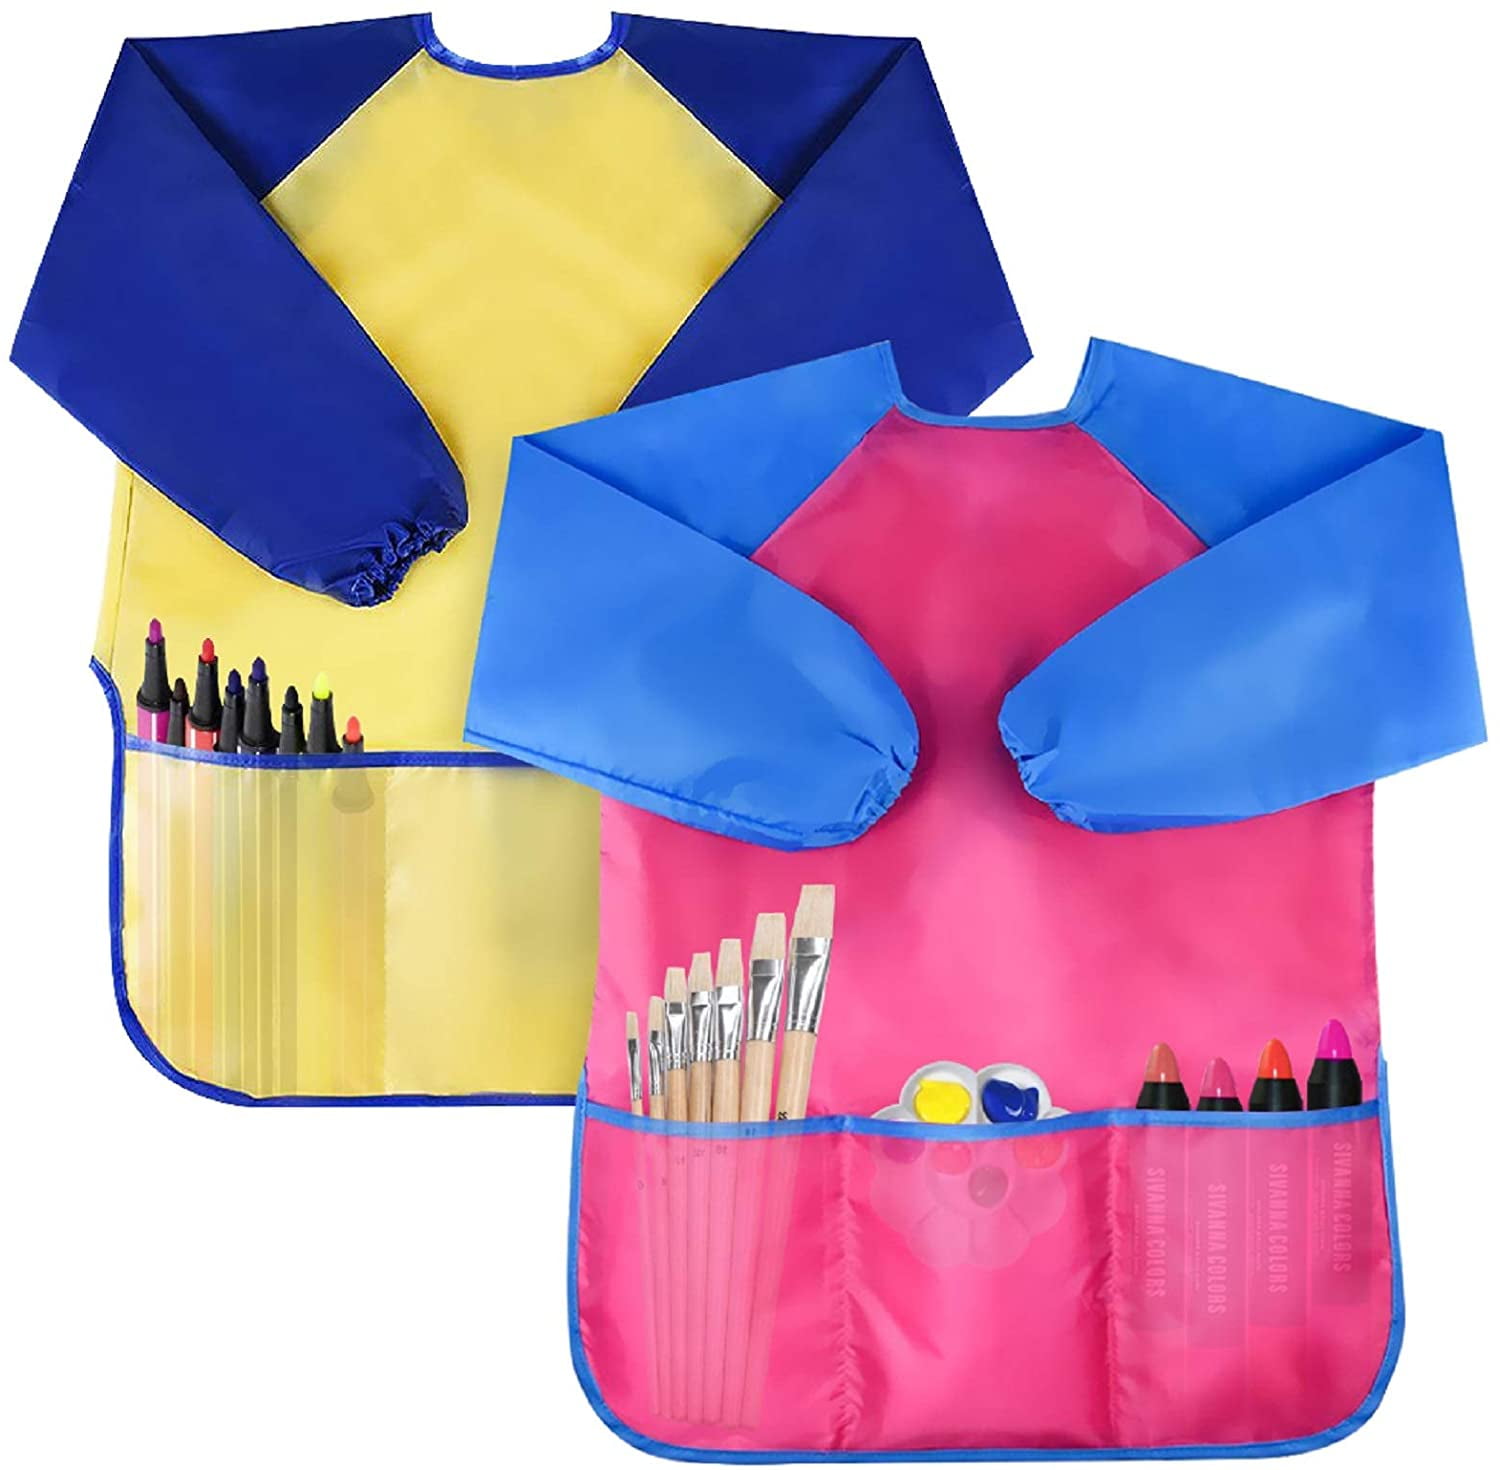 Kids Art Aprons Children Waterproof Aprons Artist Aprons with Long Sleeve,Long Section Apron for Toddler 3-8 Years -Transparent 2pcs Paints and Brushes not Included 